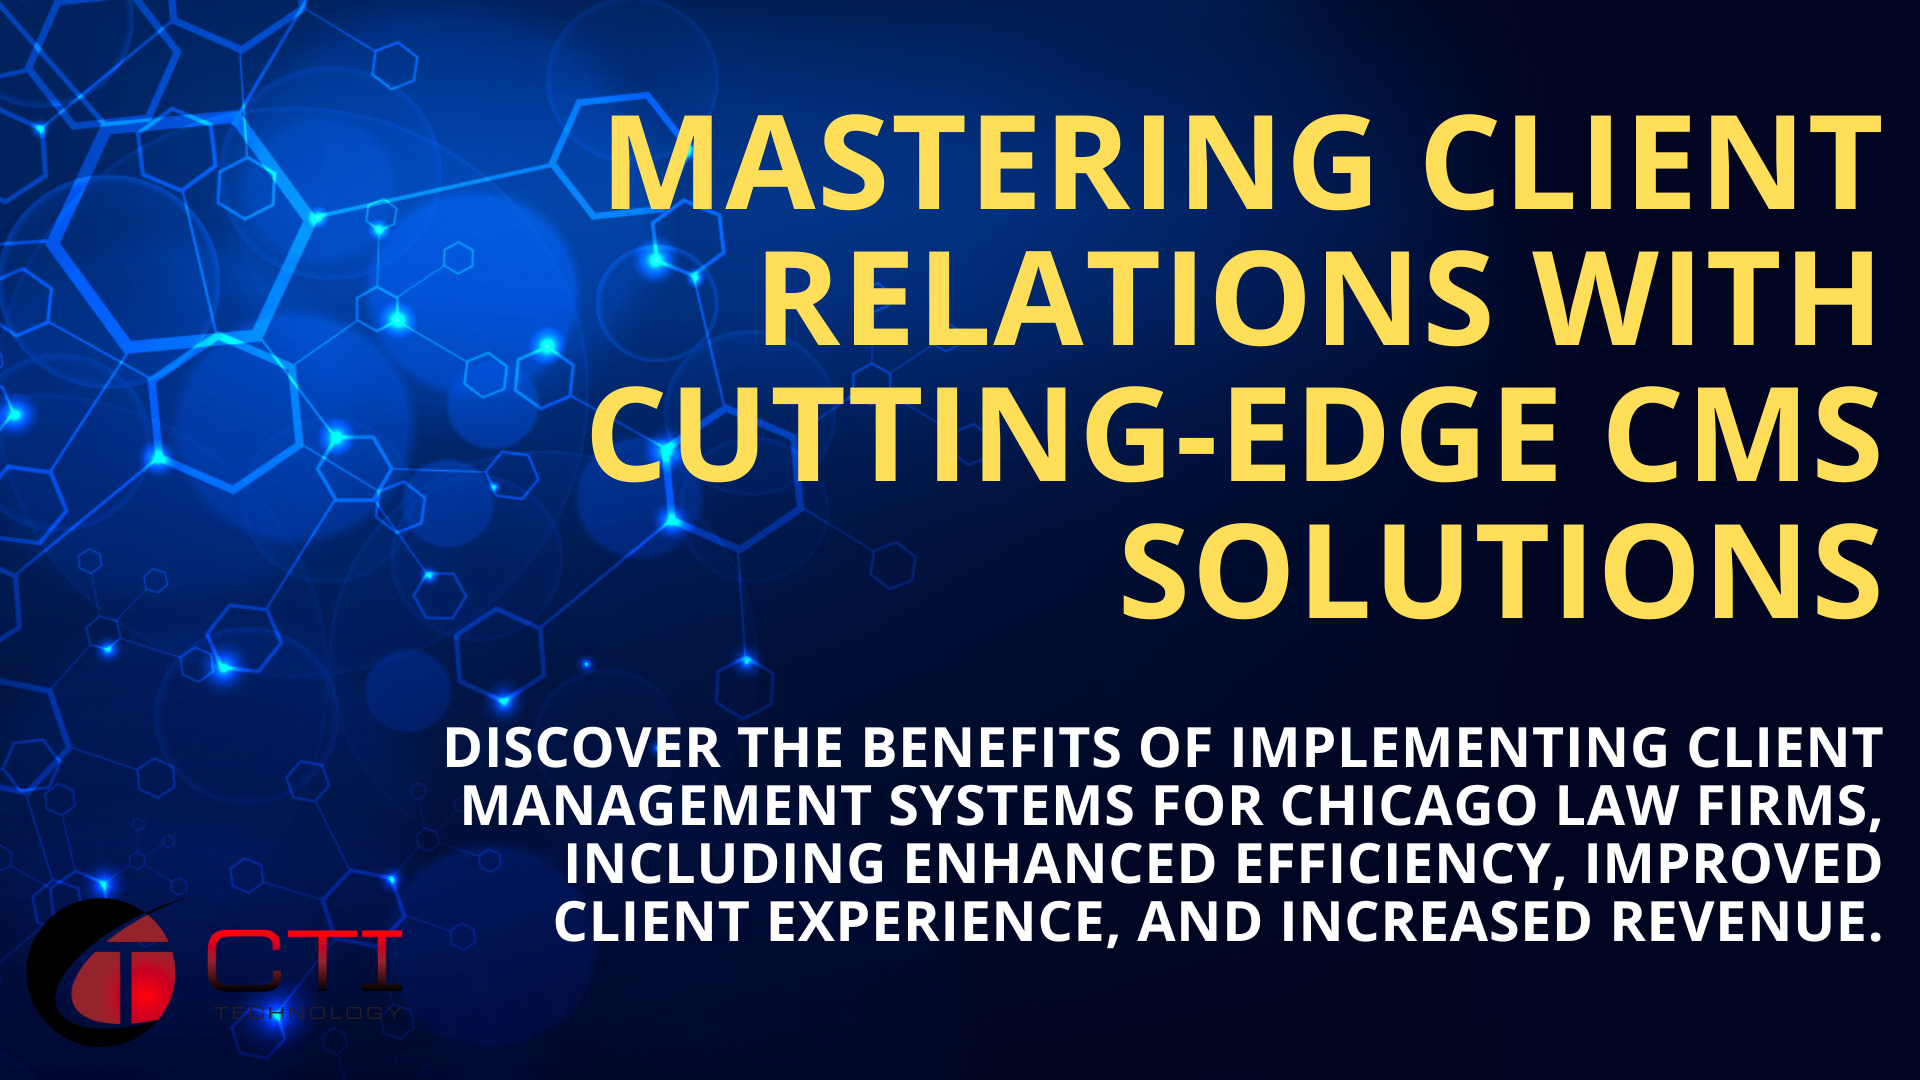 Revolutionizing Chicago Law Firms Mastering Client Relations with Cutting-Edge CMS Solutions